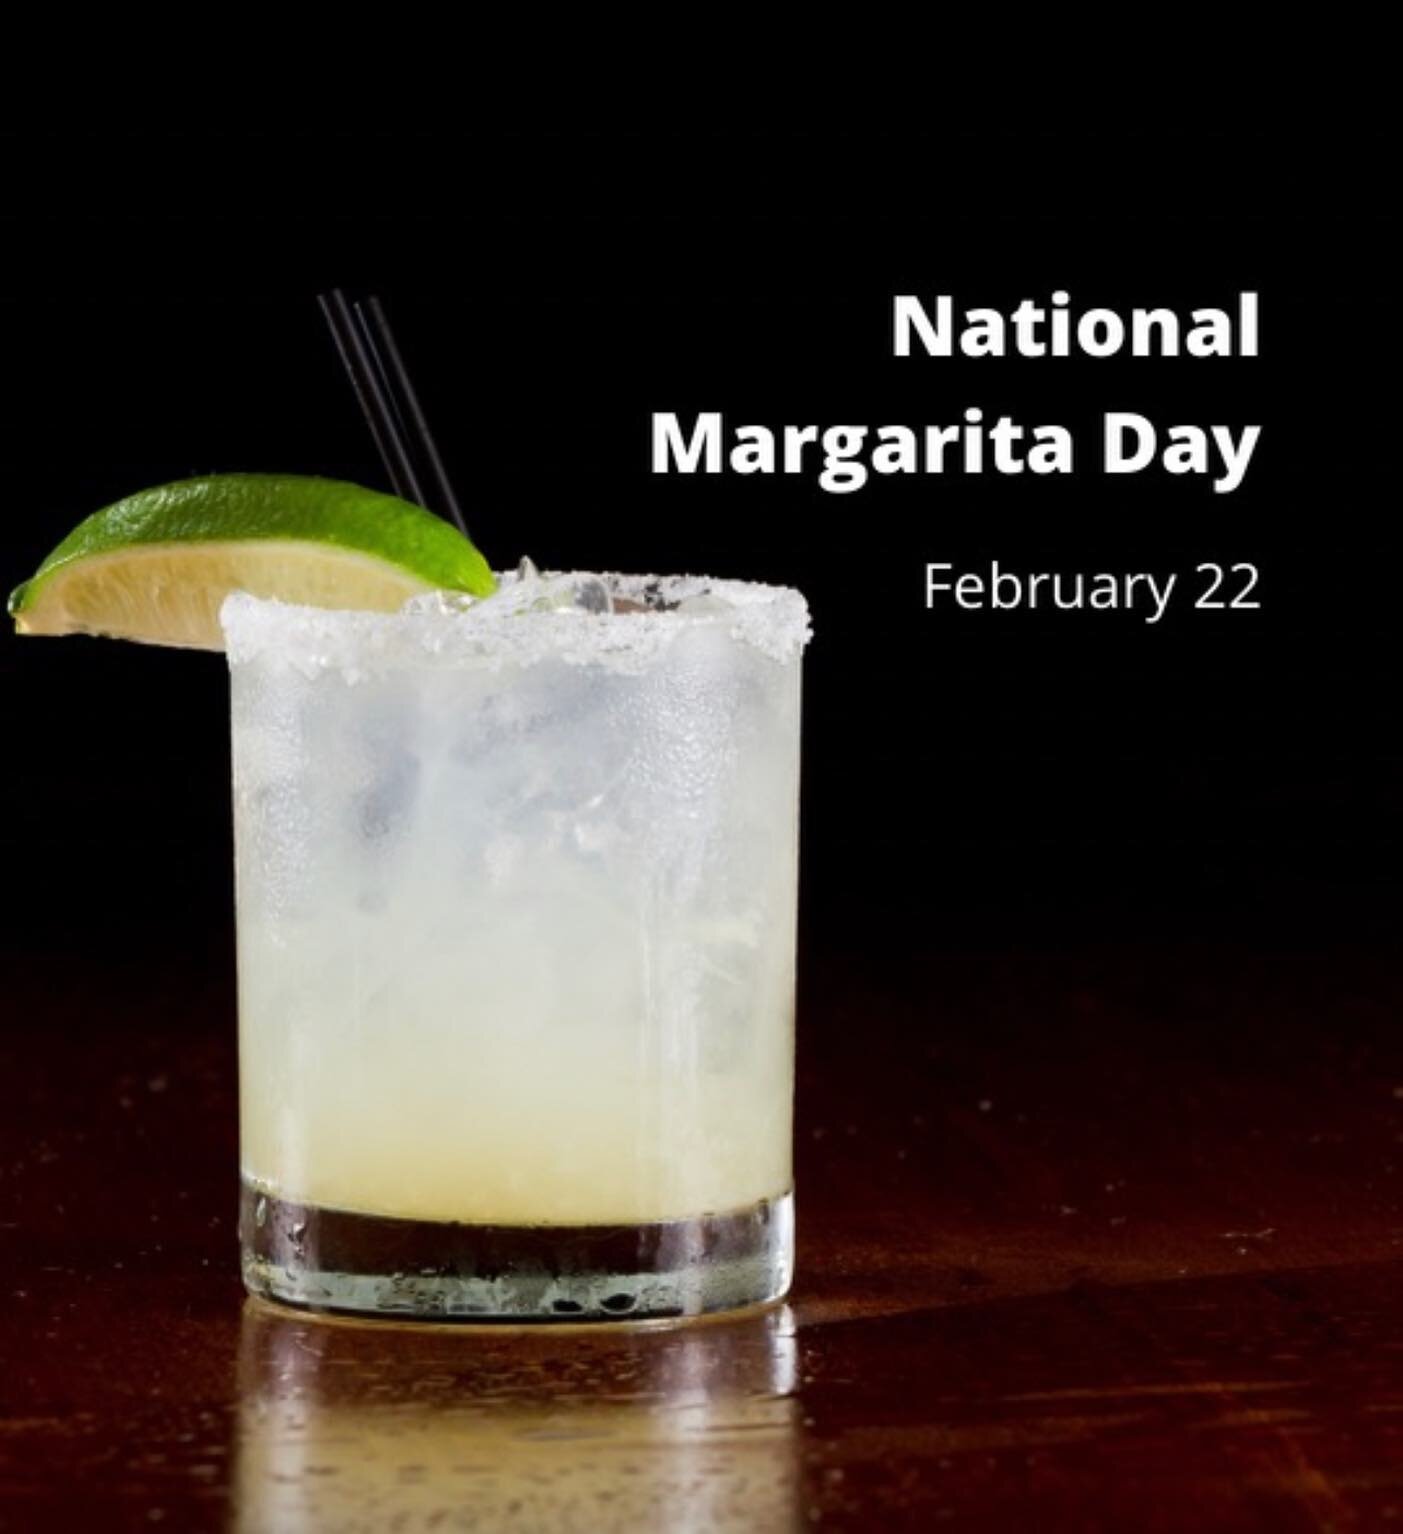 Get ready to celebrate 🎉 National Margarita Day 🎉with us this Wednesday 2/22. $2.00 margaritas all day🍹